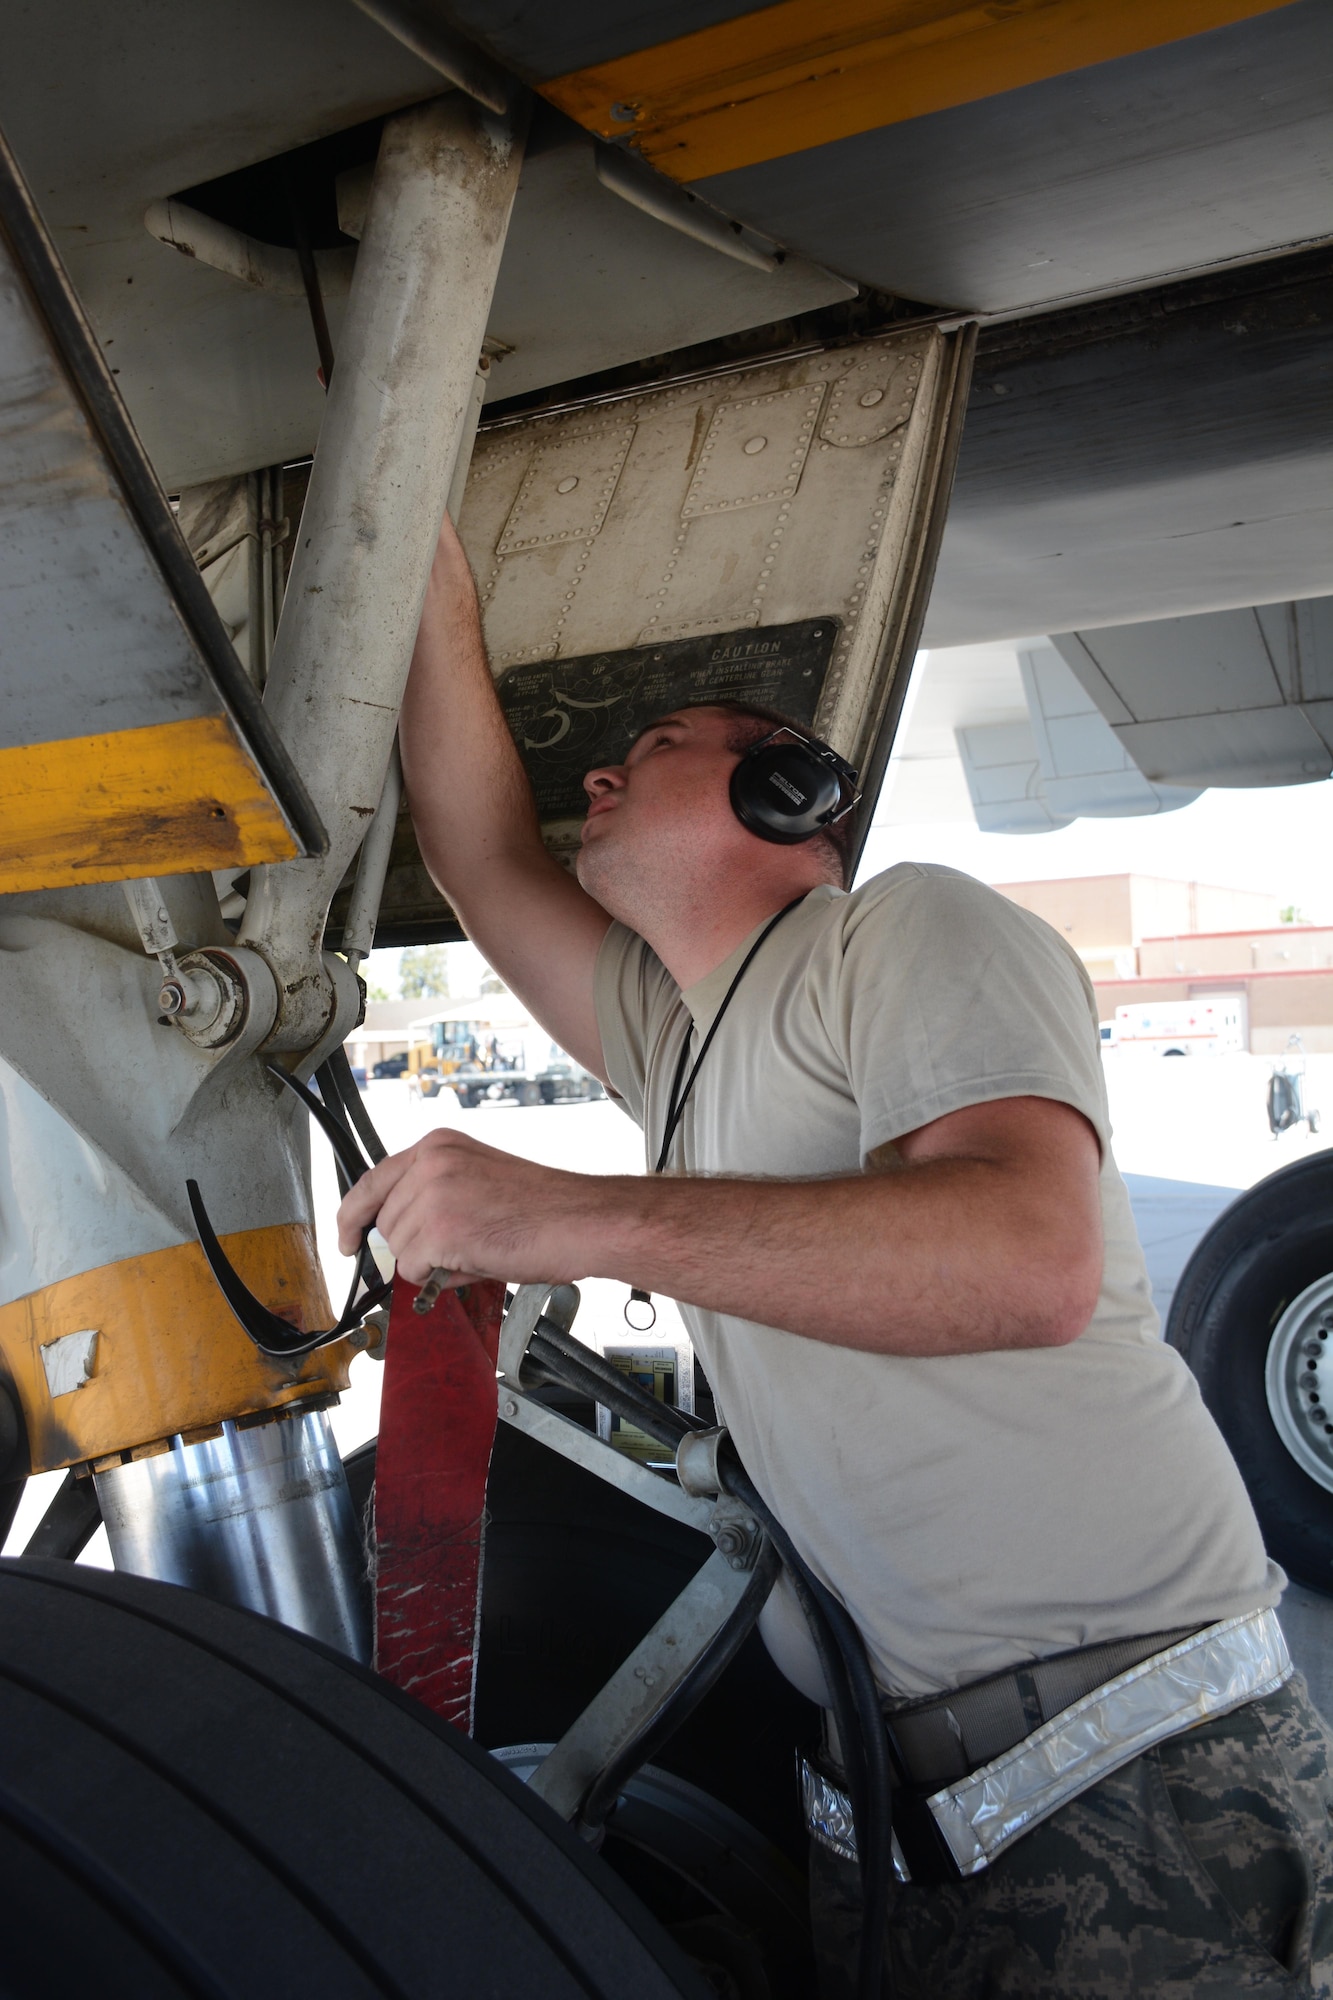 Senior Airman Nicholas Porter, 749th Aircraft Maintenance Squadron crew chief, performs maintenance checks July 15, 2016 after landing at Luke Air Force Base, Arizona. An aircrew of 70th Air Refueling Squadron members departed Travis Air Force Base, Calif., July 11, 2016 en route to Royal Air Force Base Fairford in Gloucestershire, England. The purpose of the trip is to refuel F-35A Lightning II jet fighters that are returning to the United States after participating in the world's largest air show. (U.S. Air Force photos by Staff Sgt. Madelyn Brown) 